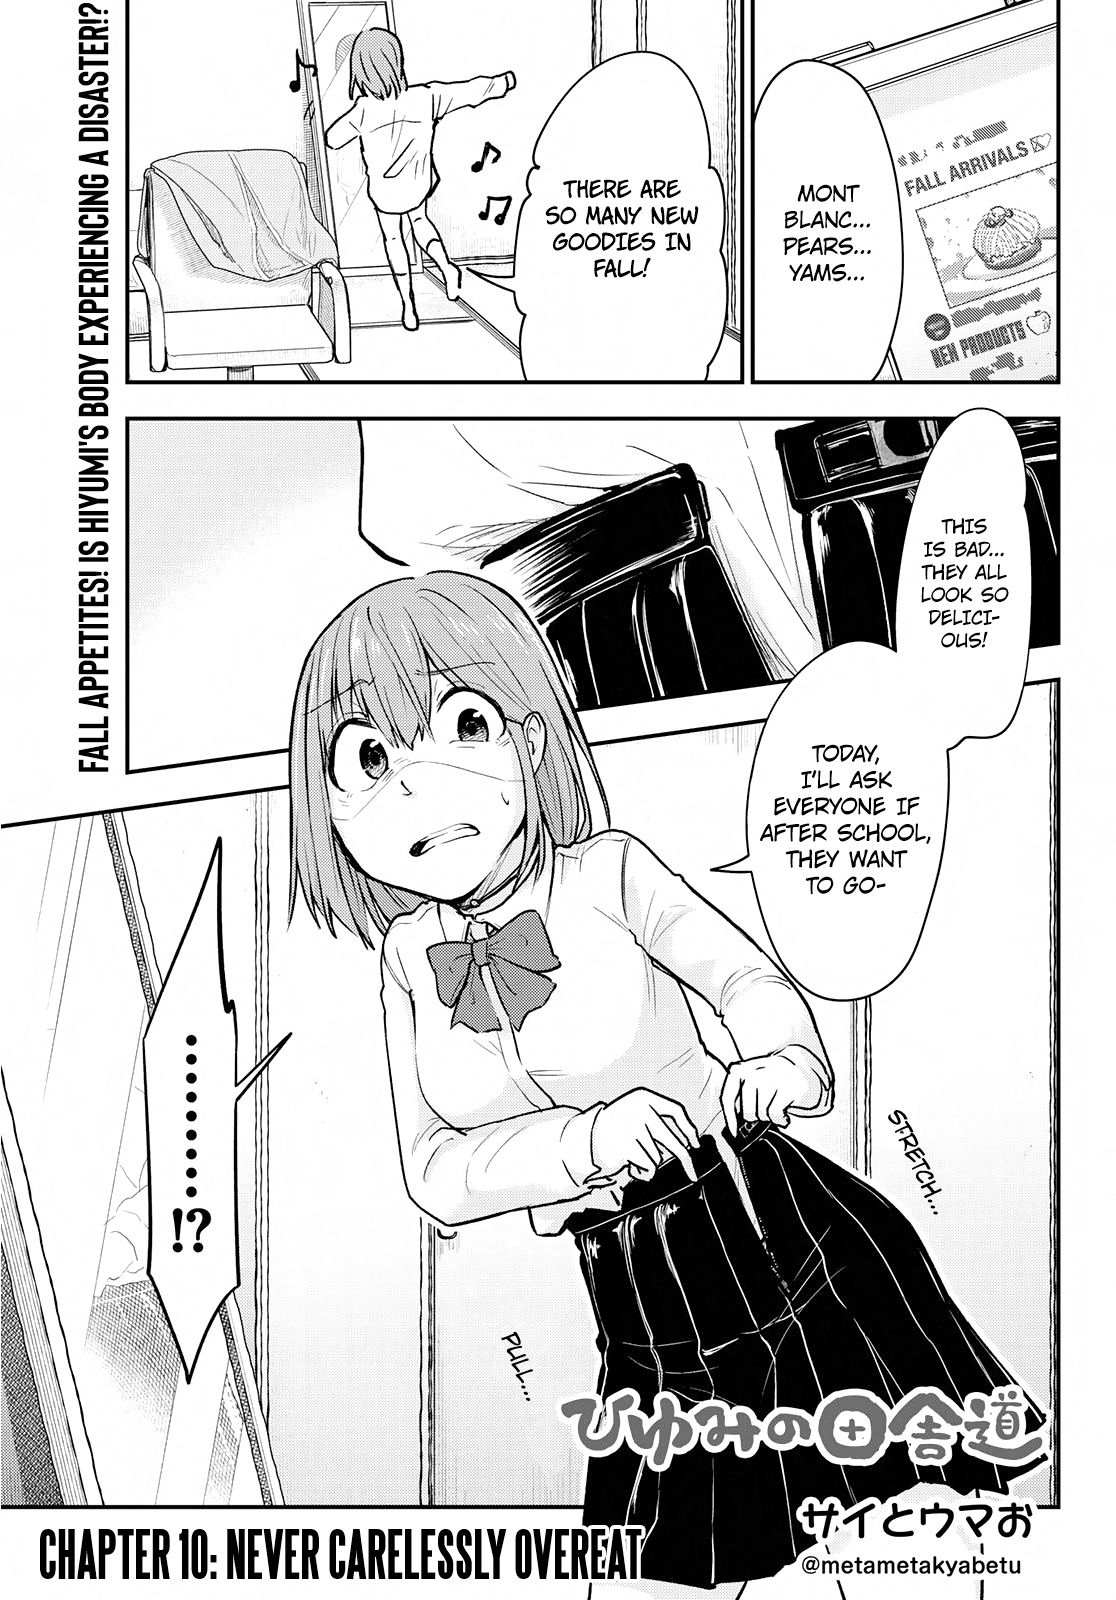 Hiyumi's Country Road - chapter 10 - #1